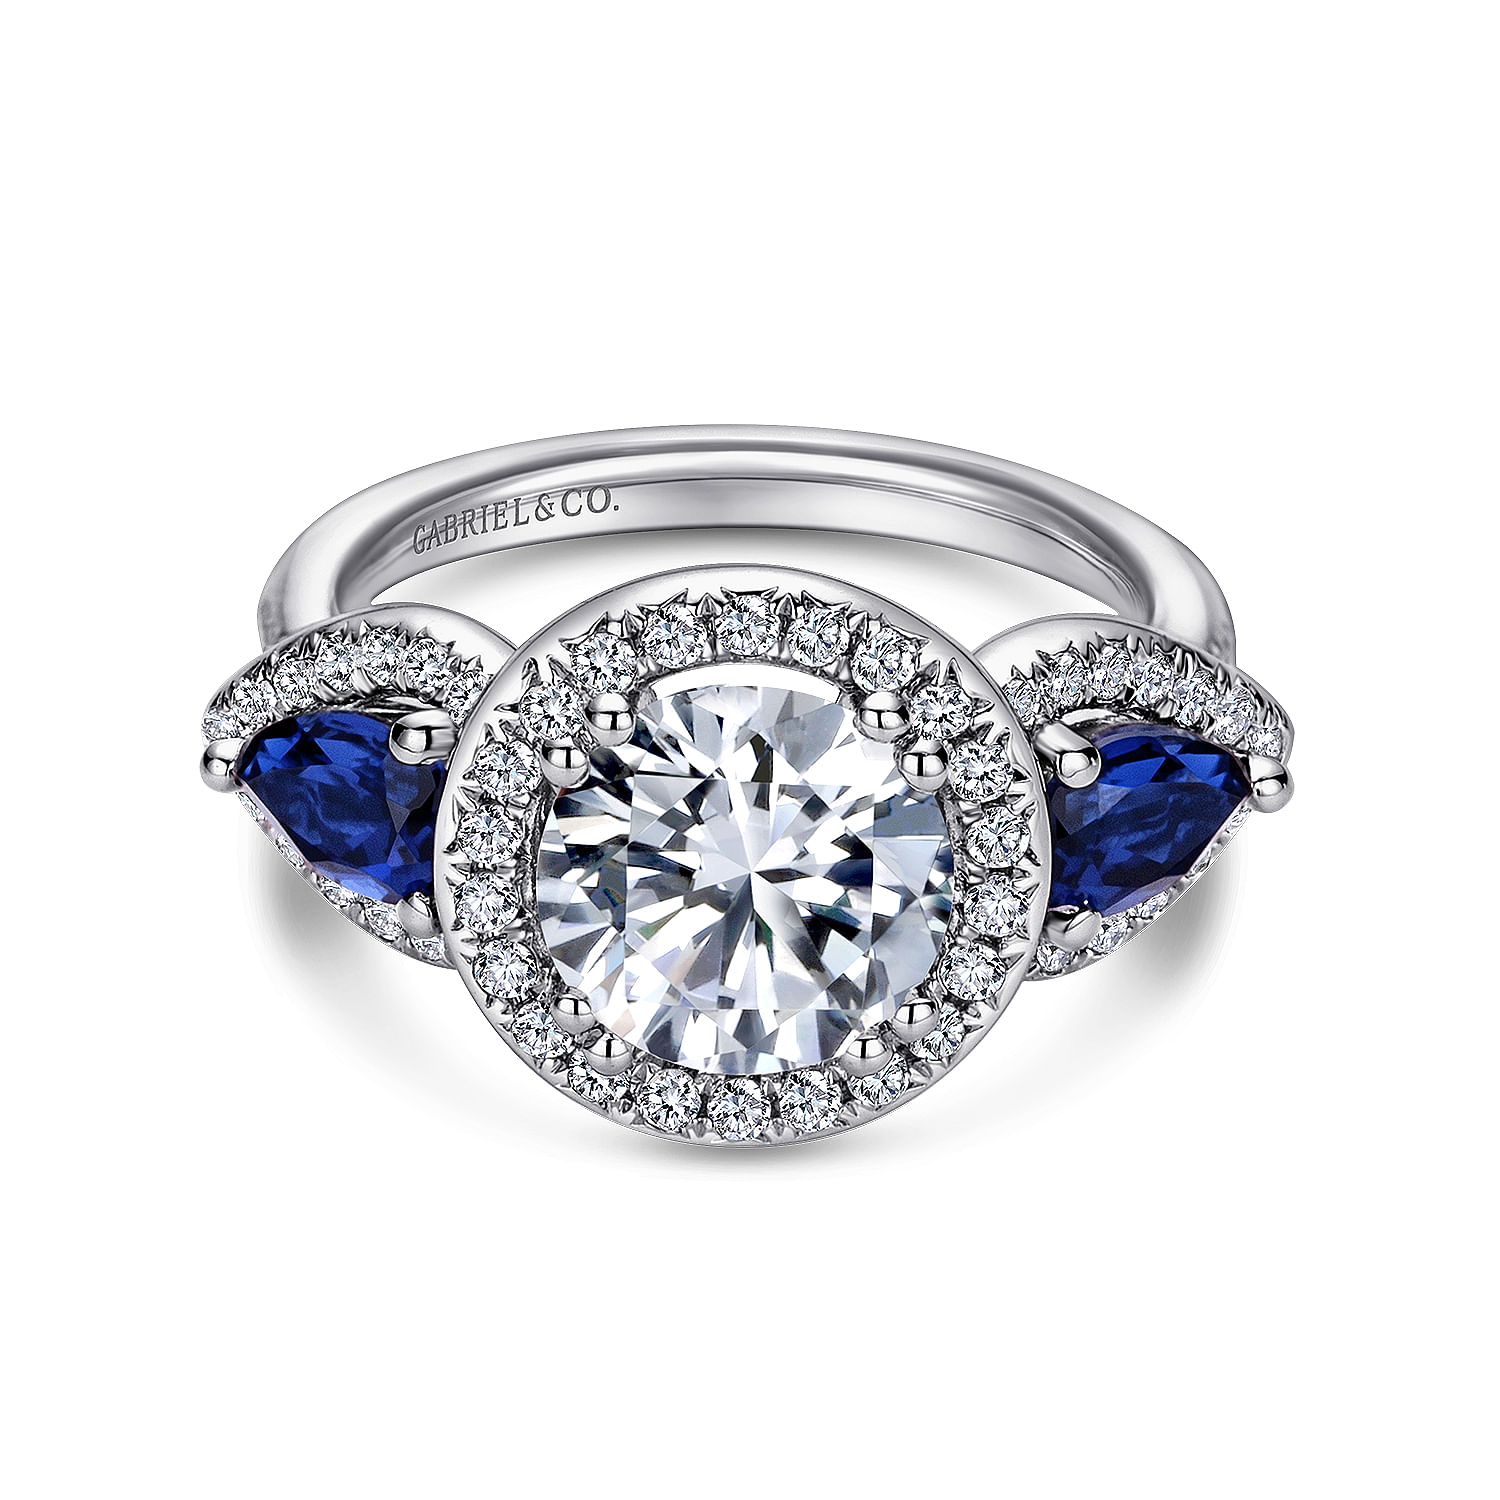 14K White Gold Sapphire and Diamond Engagement Ring